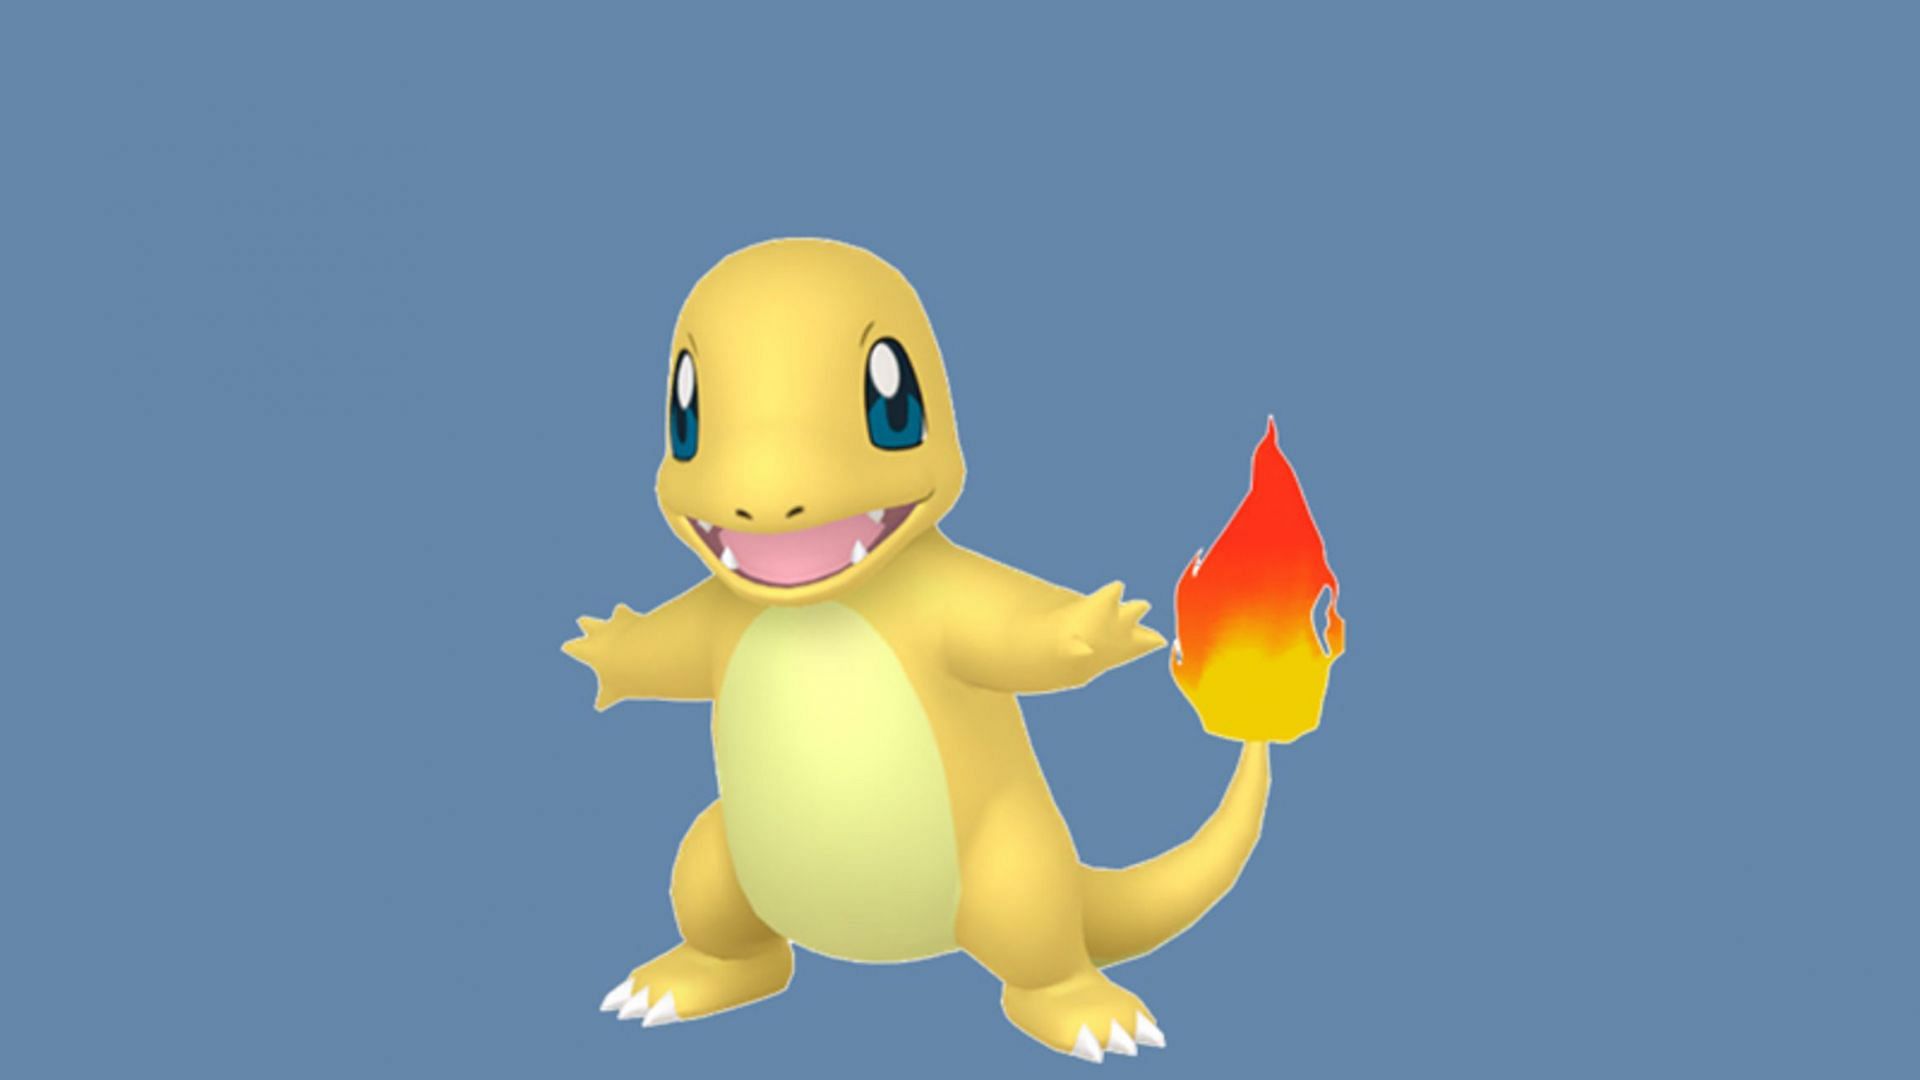 Charmander recently had an uptick in shiny appearances during the Mega Moment event (Image via The Pokemon Company)